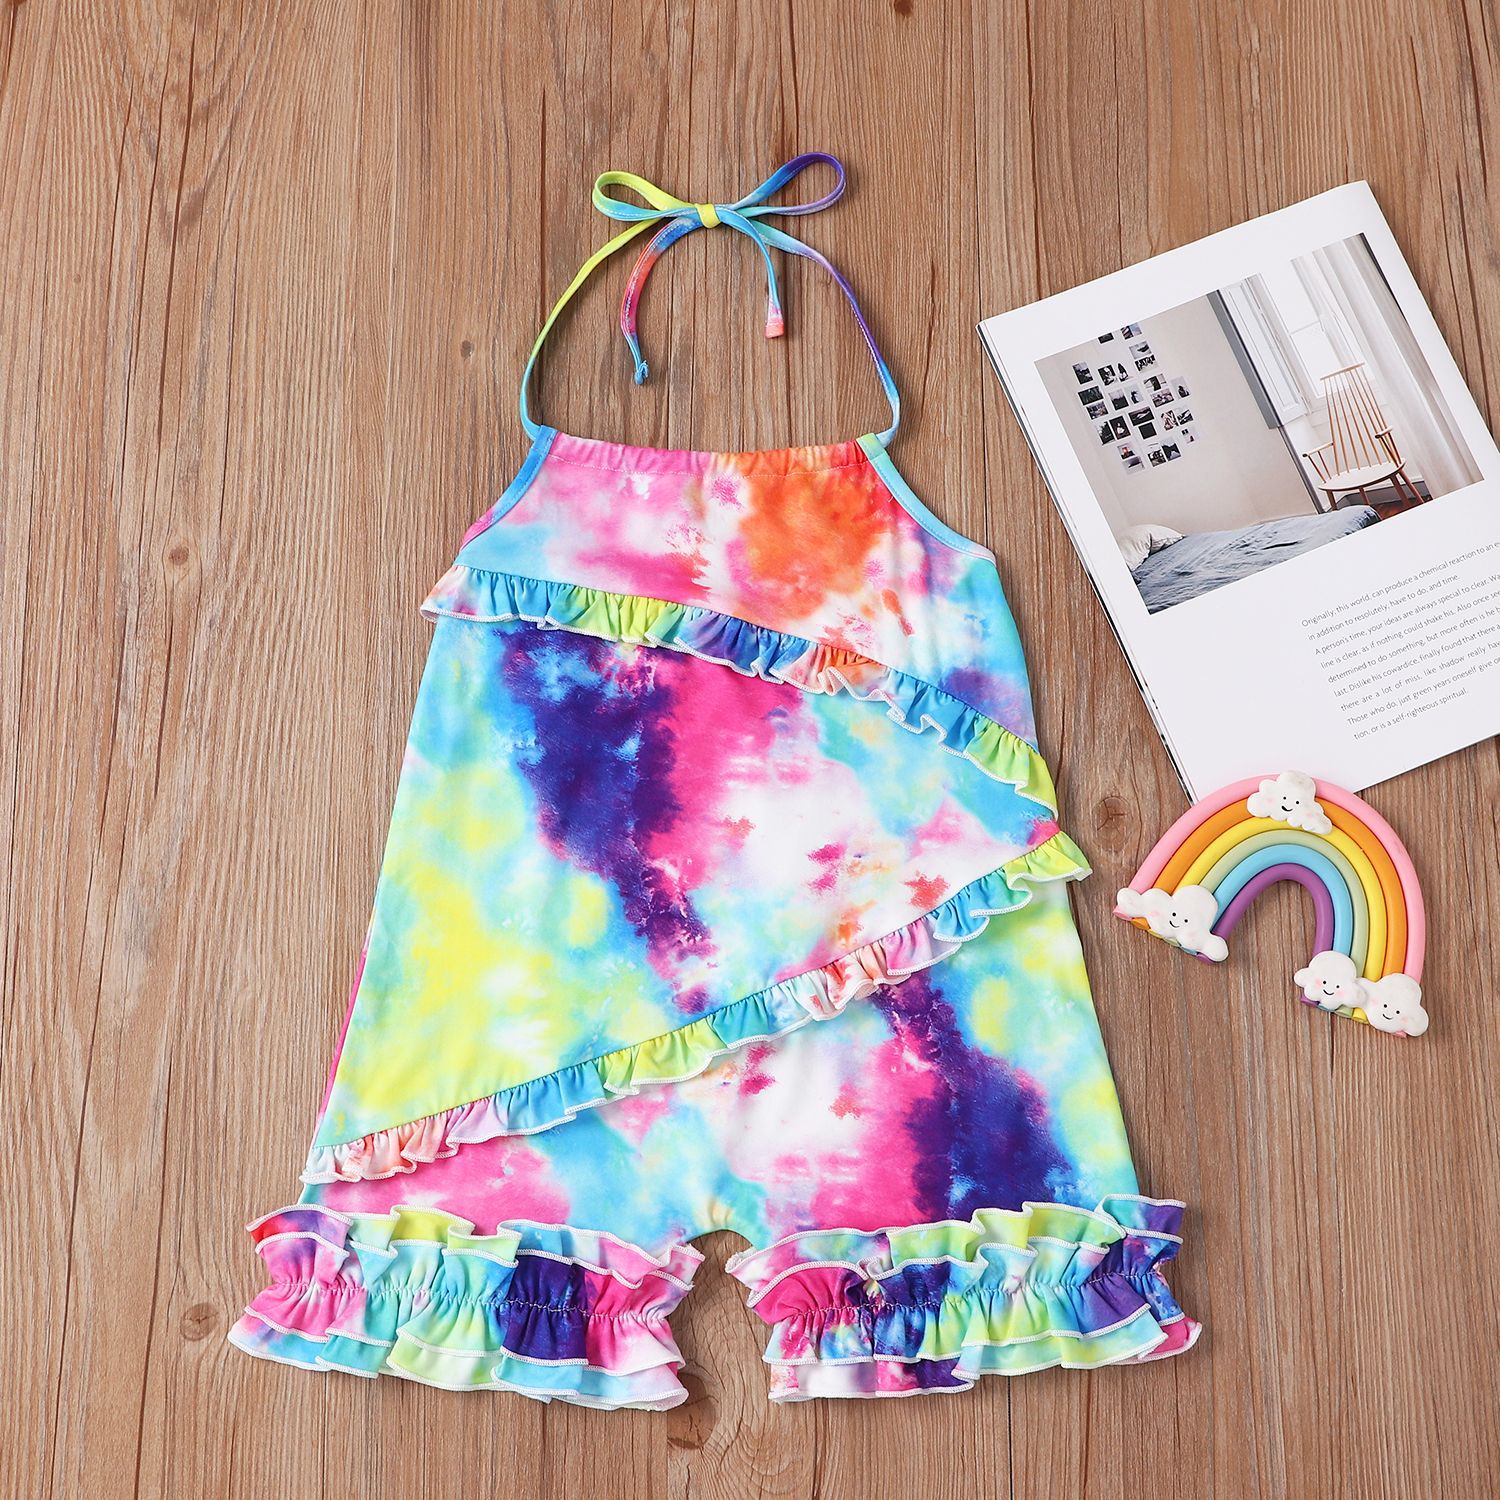 Striped-Rainbow-Princess-Romper-Baby-Kids-Girls-Clothes-Summer-Sleeveless-Ruffle-Pleated-Halter-Rompers-Fashion-Short-4